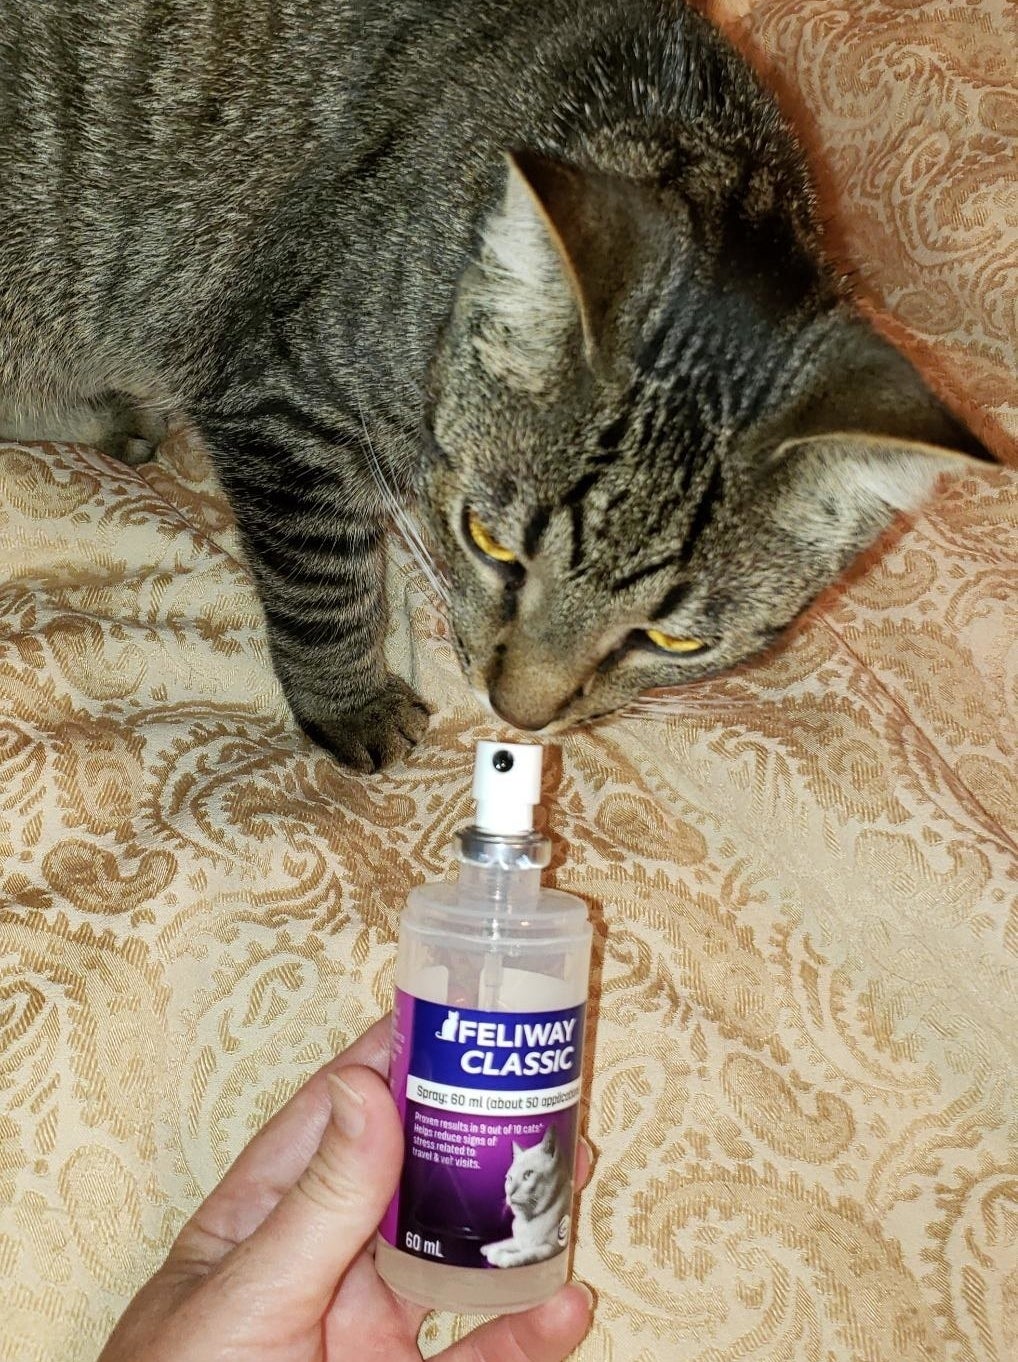 A person&#x27;s hand holding the Feliway Classic spray and a cat sniffing it